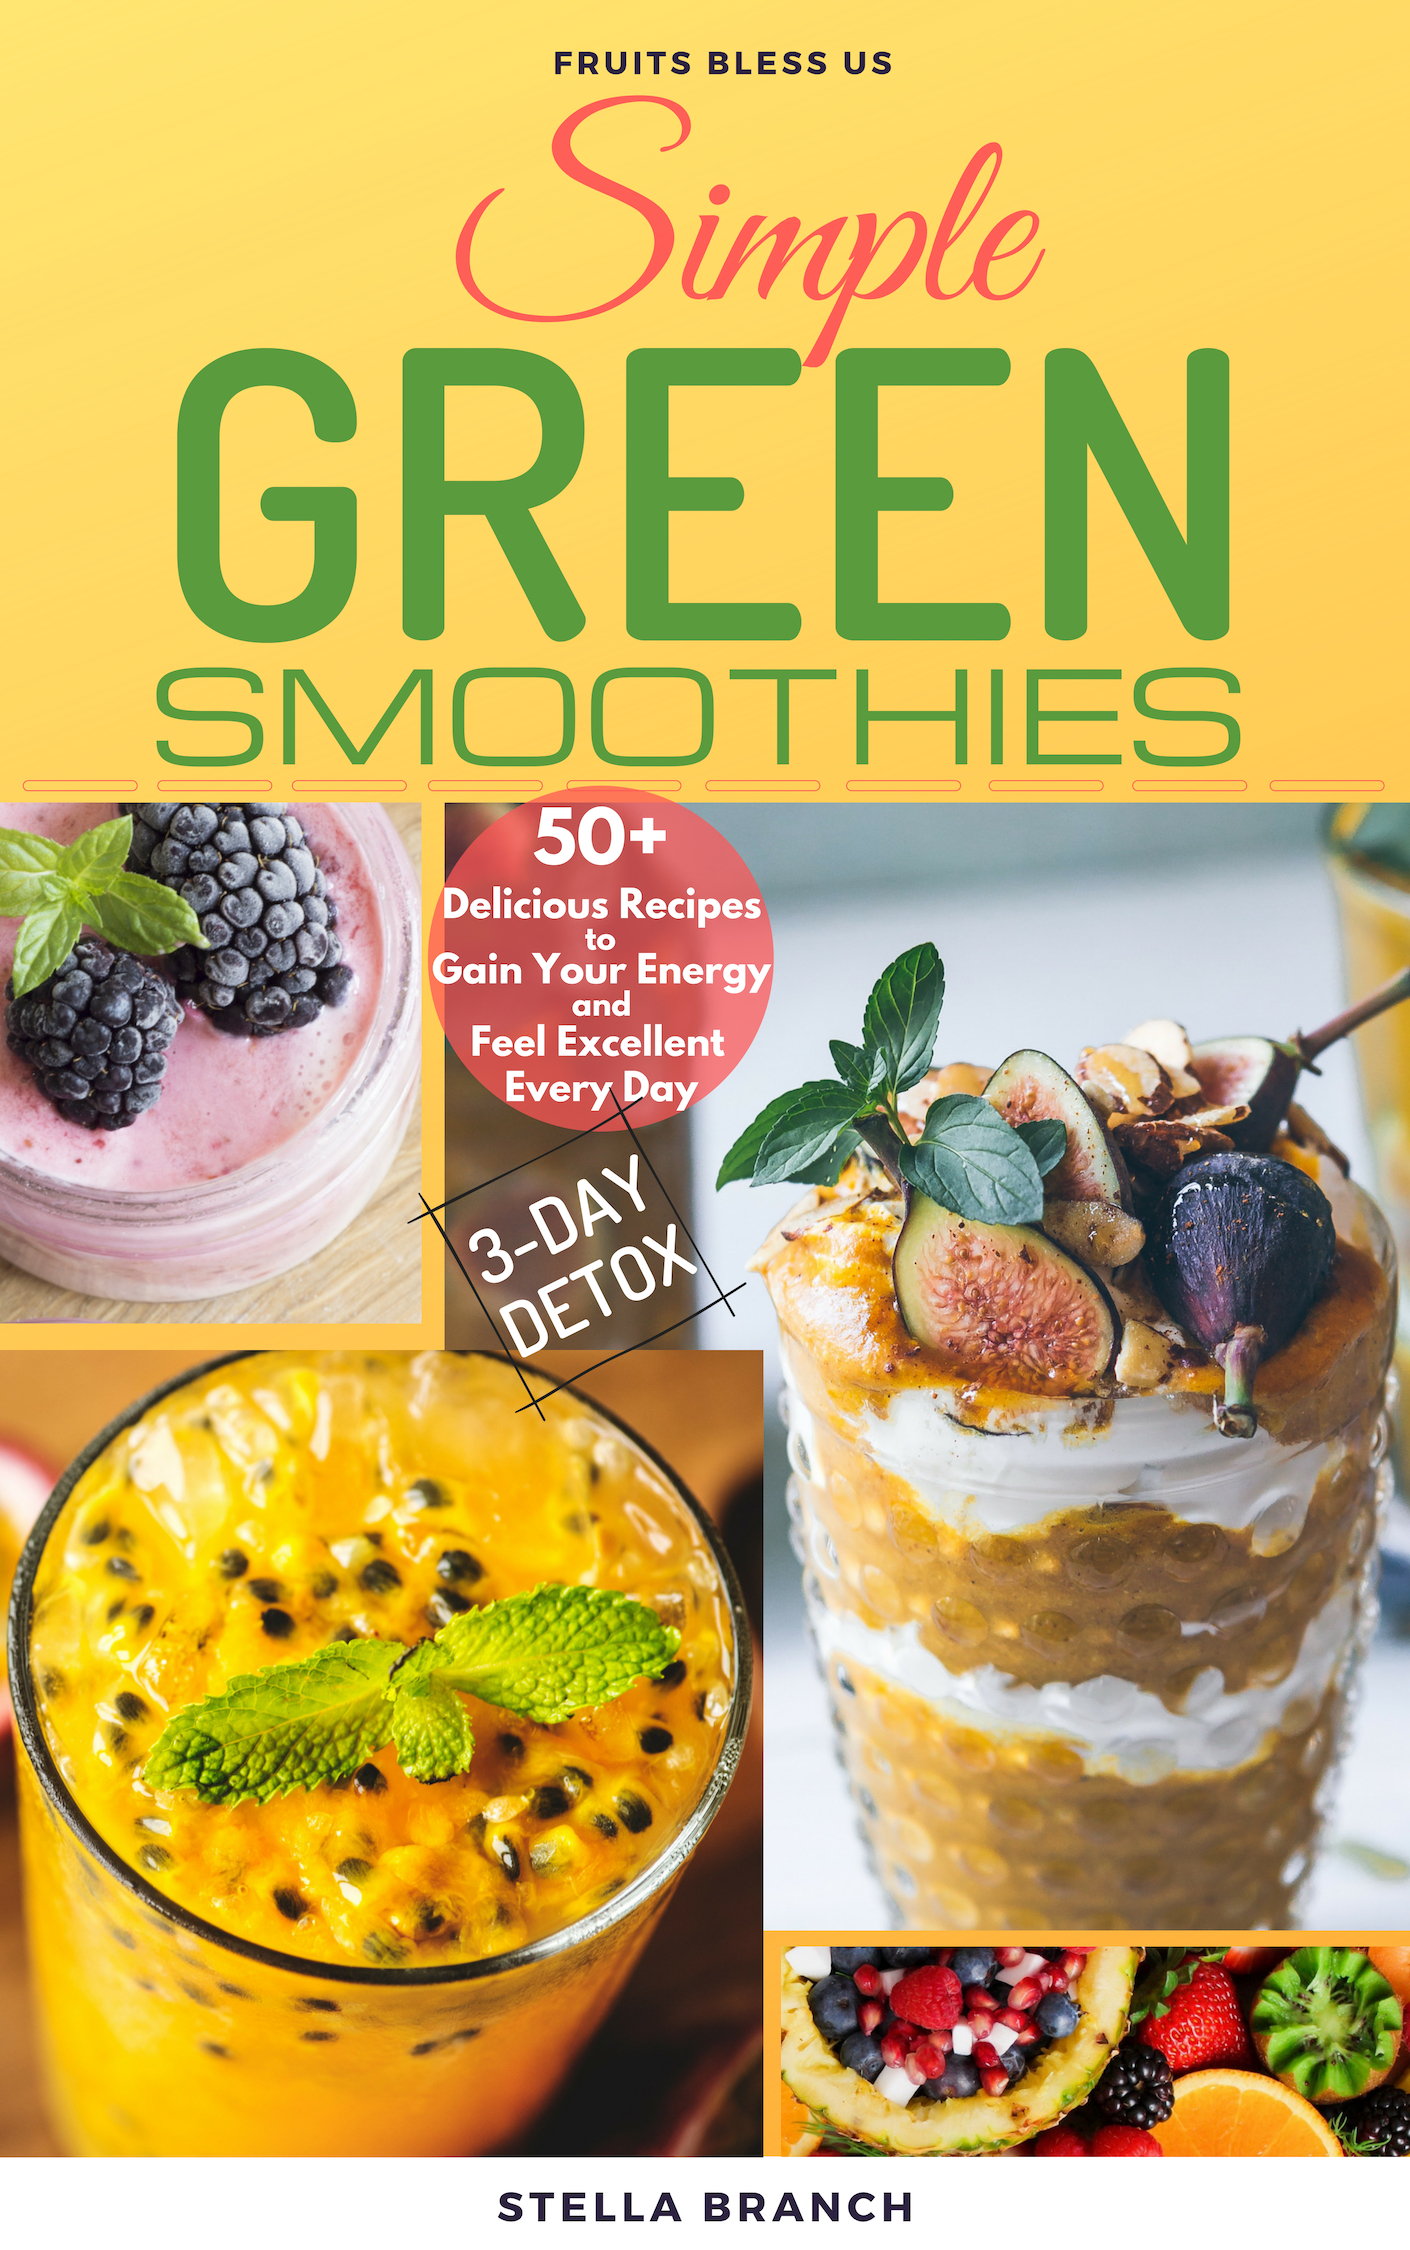 FREE: Simple Green Smoothies to Lose Weight: 50+ Delicious Recipes to Gain Energy and Feel Excellent Every Day by STELLA BRANCH